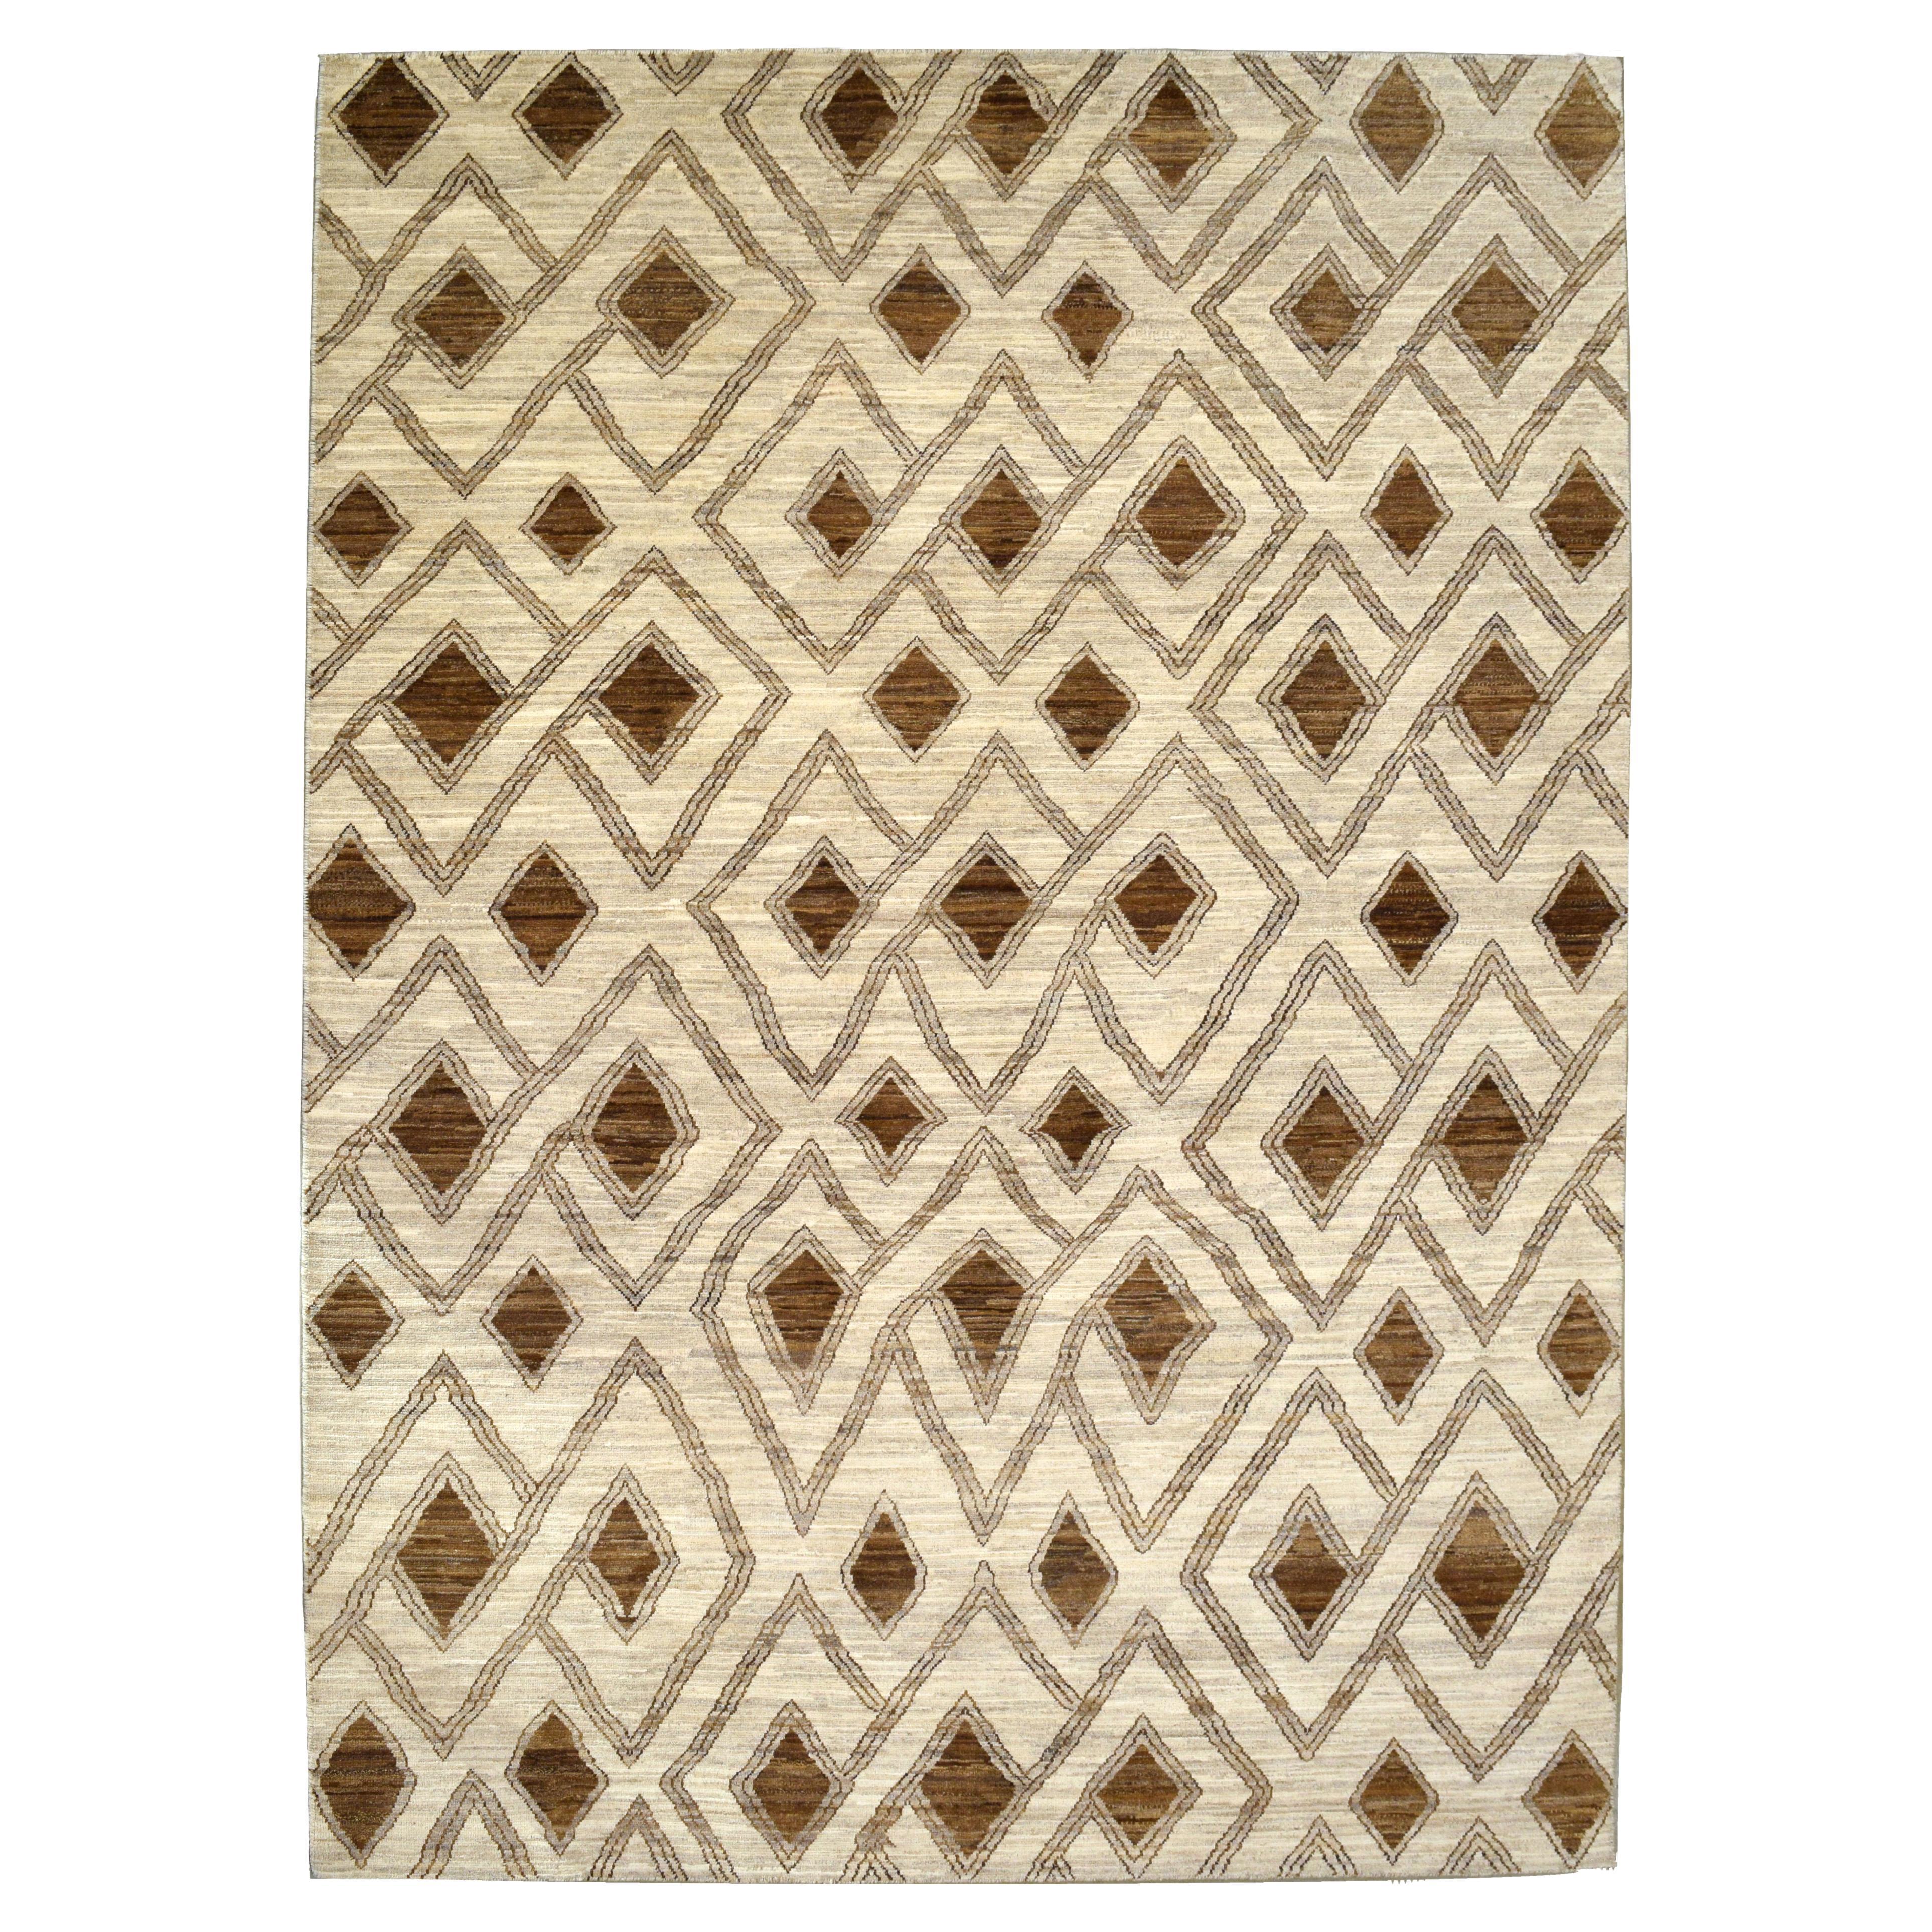 Geometric Neutral Wool Carpet in Brown and Cream, 6' x 9' For Sale